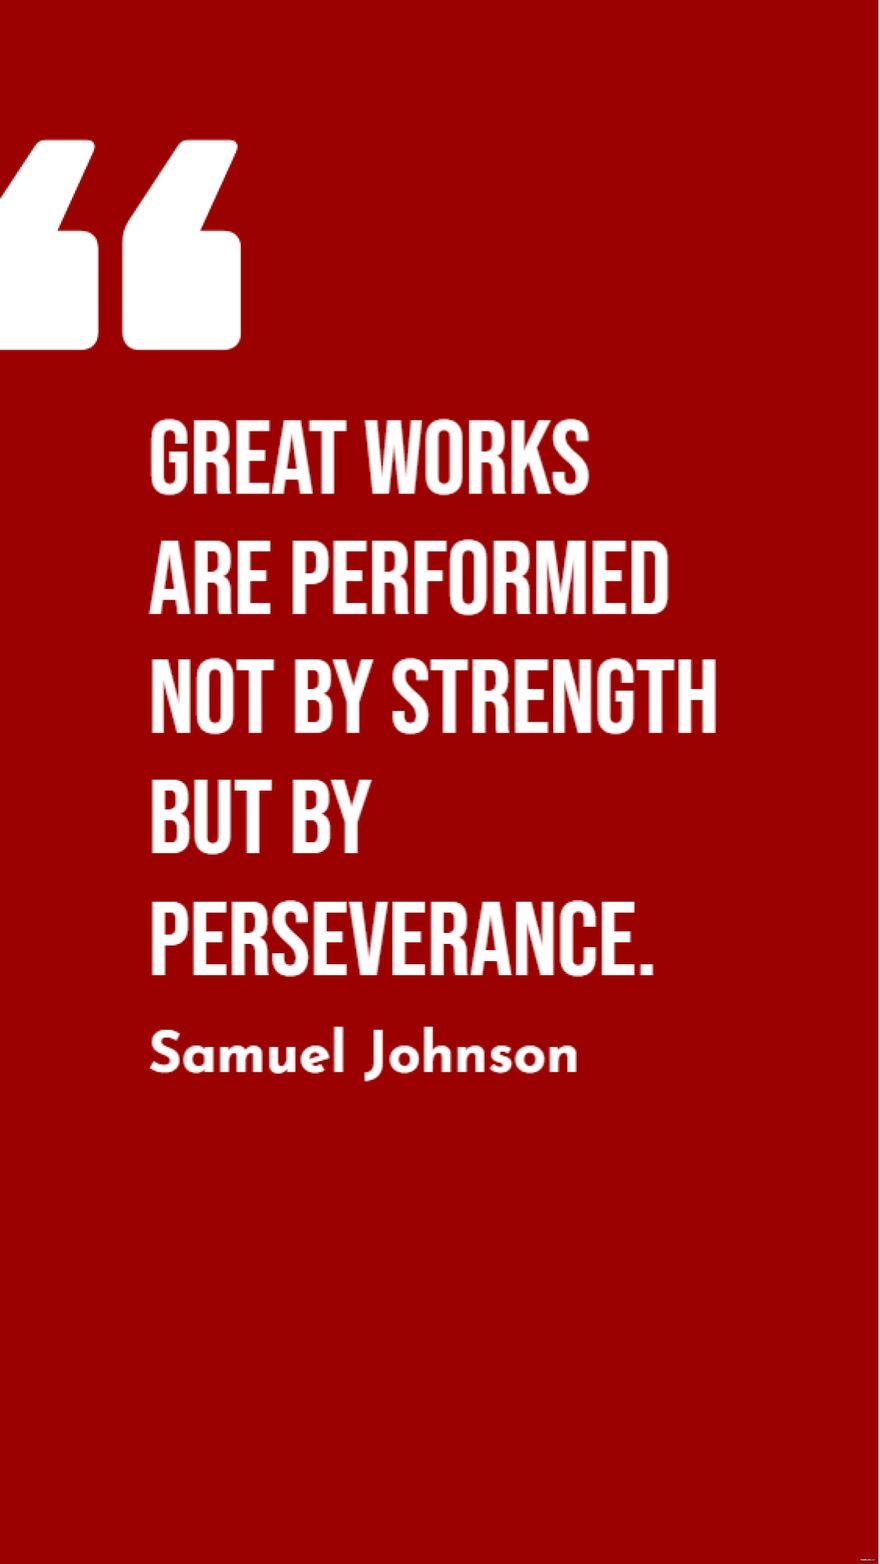 Samuel Johnson - Great works are performed not by strength but by perseverance.